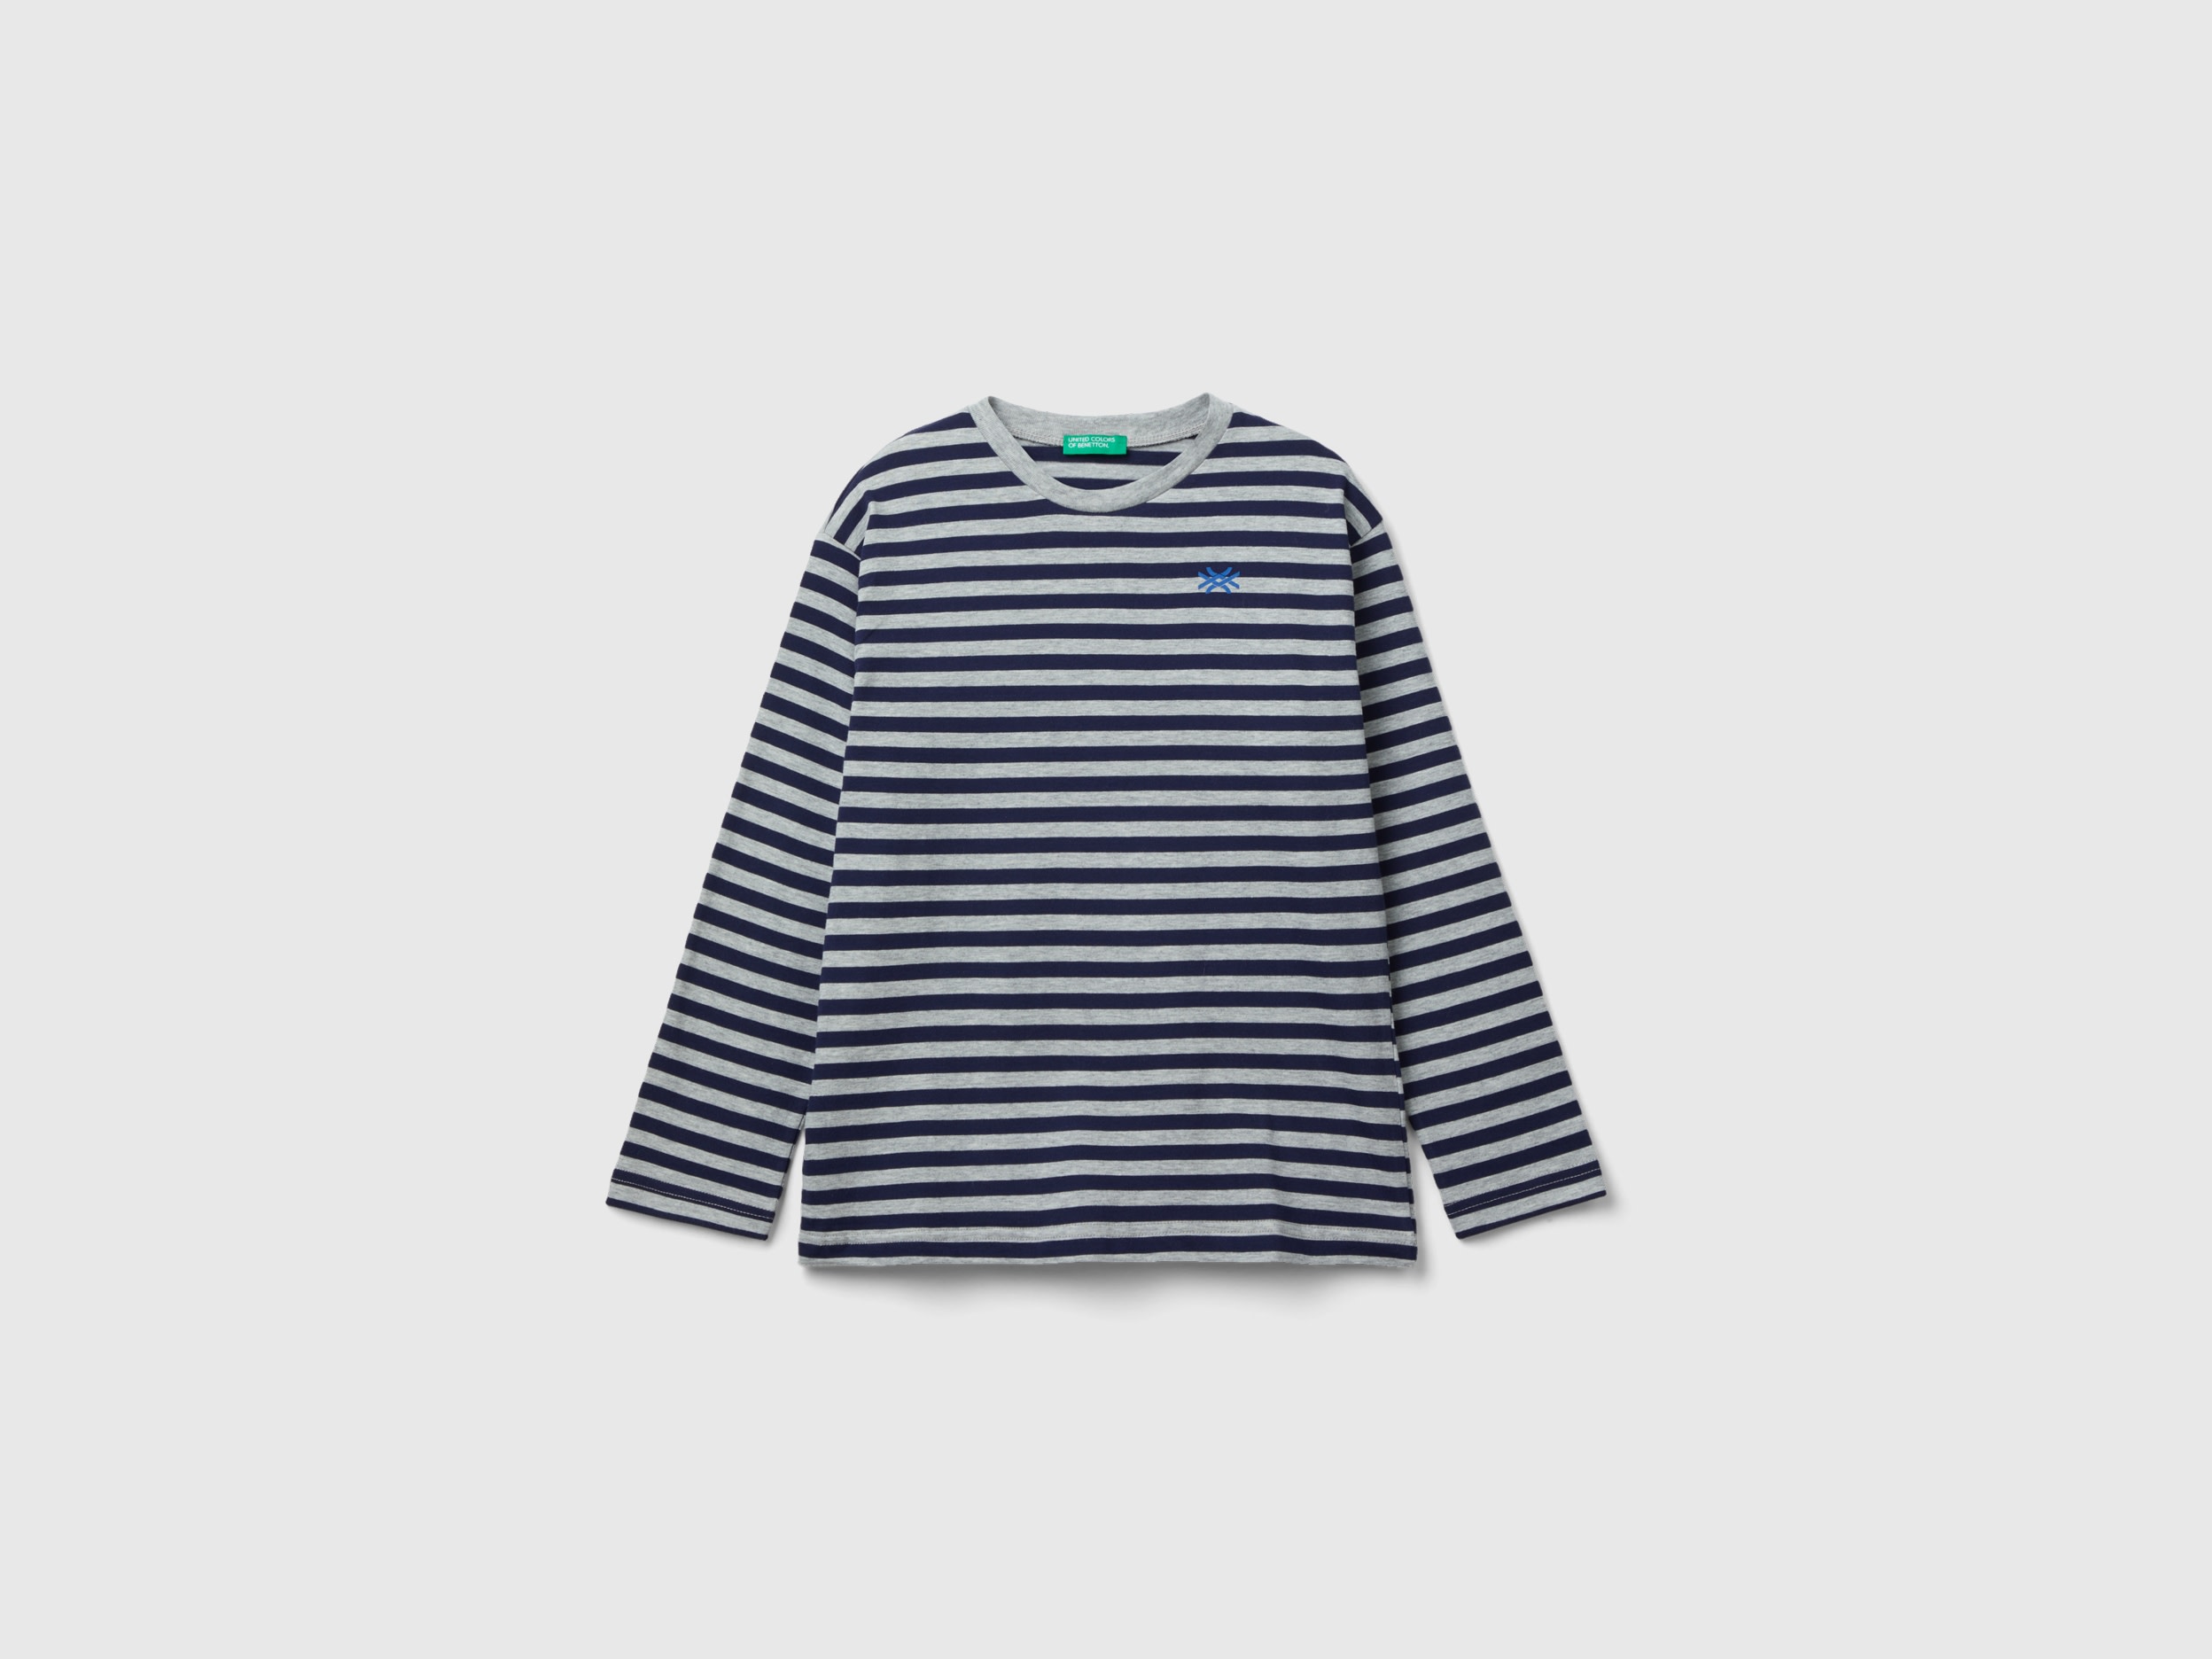 Benetton, Striped T-shirt In 100% Cotton, size S, Gray, Kids